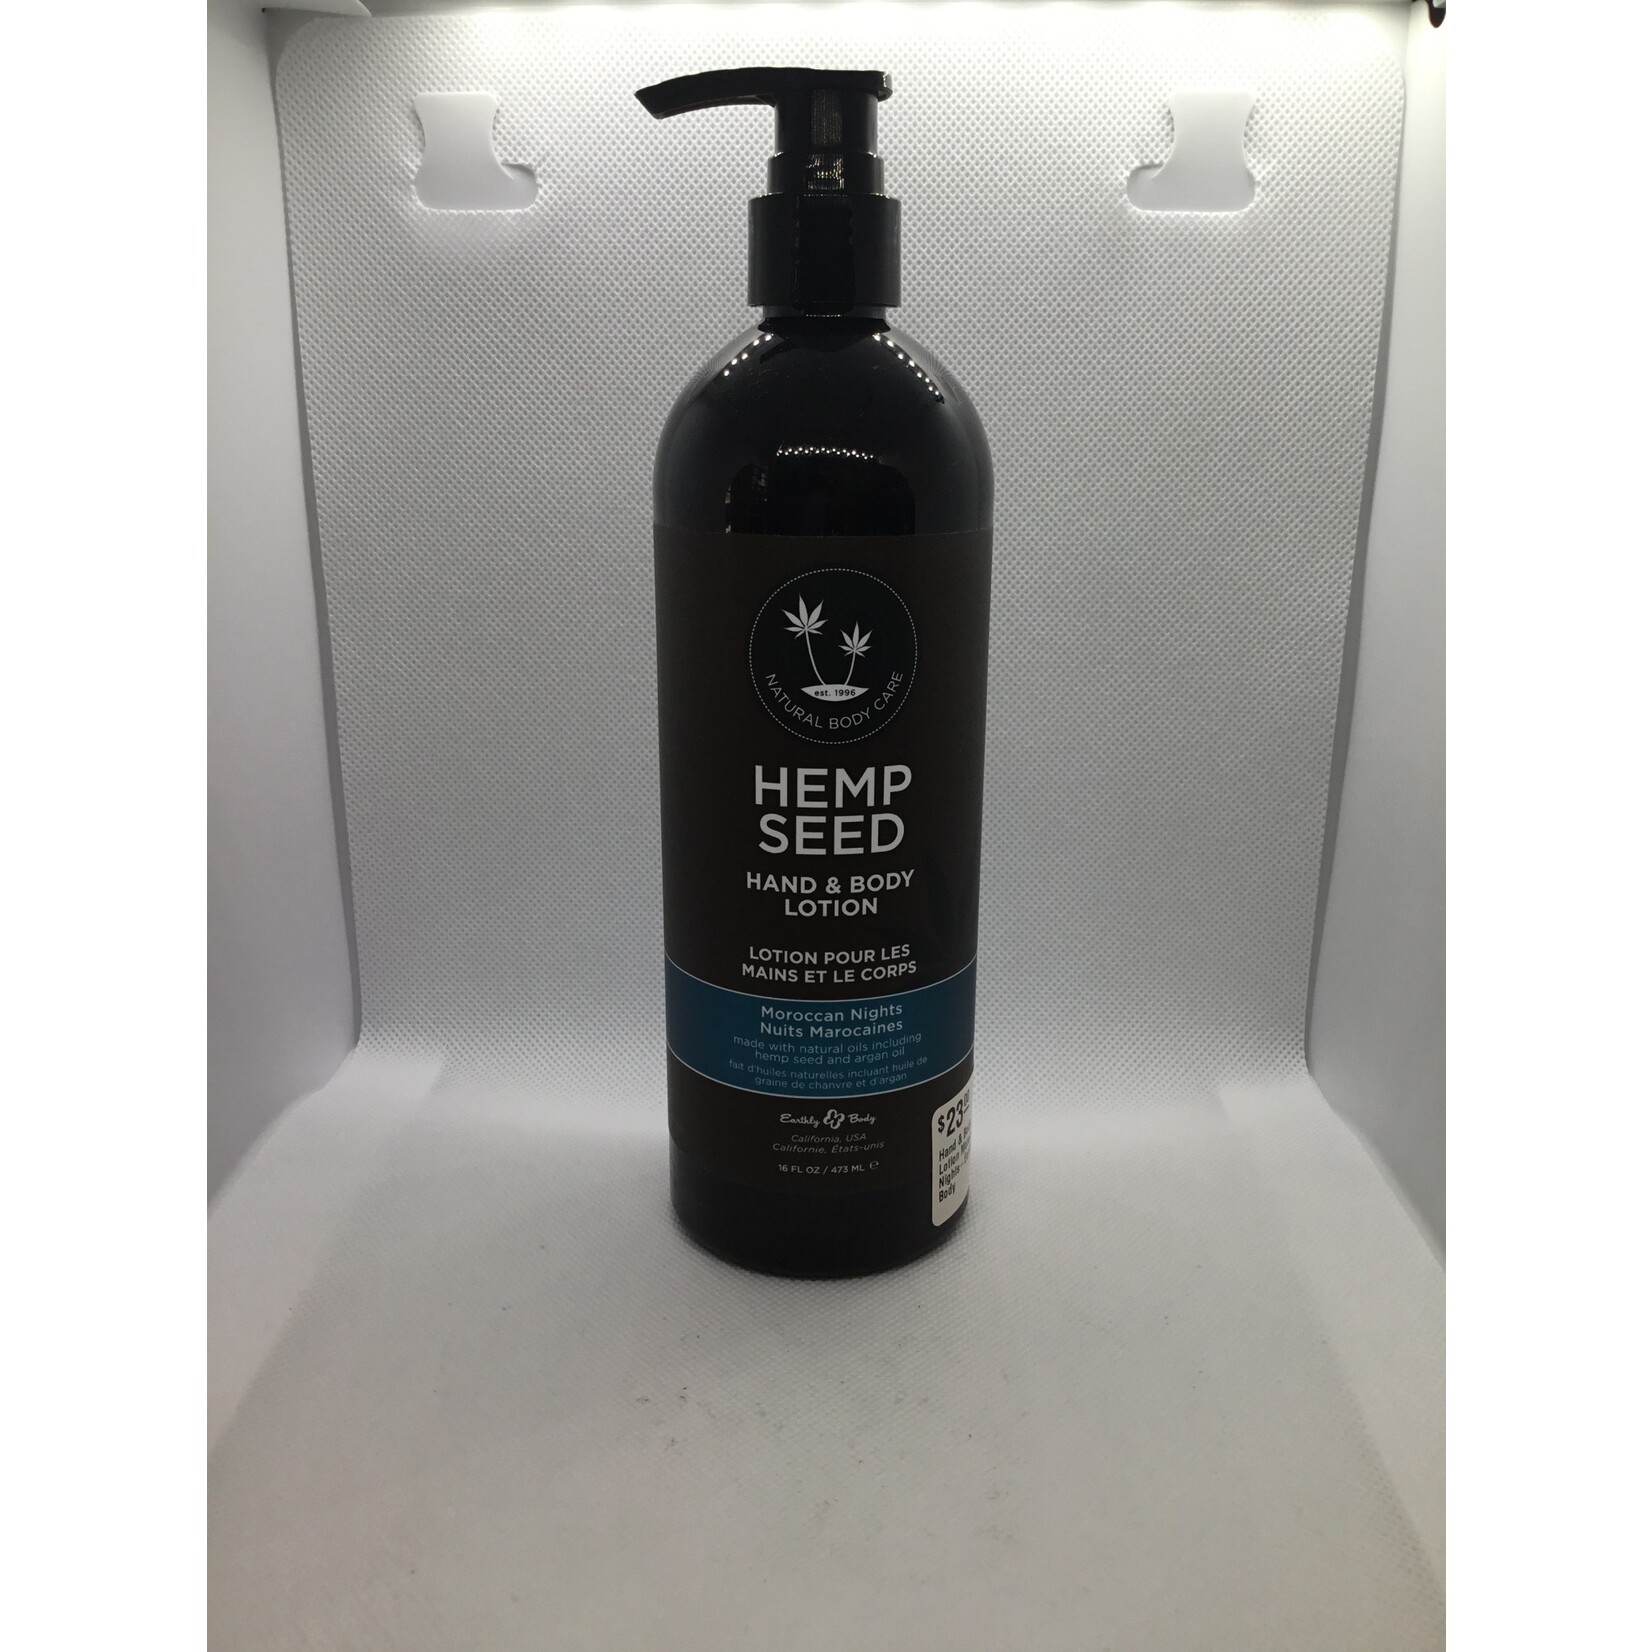 Earthly Body Hand & Body Lotion 16oz